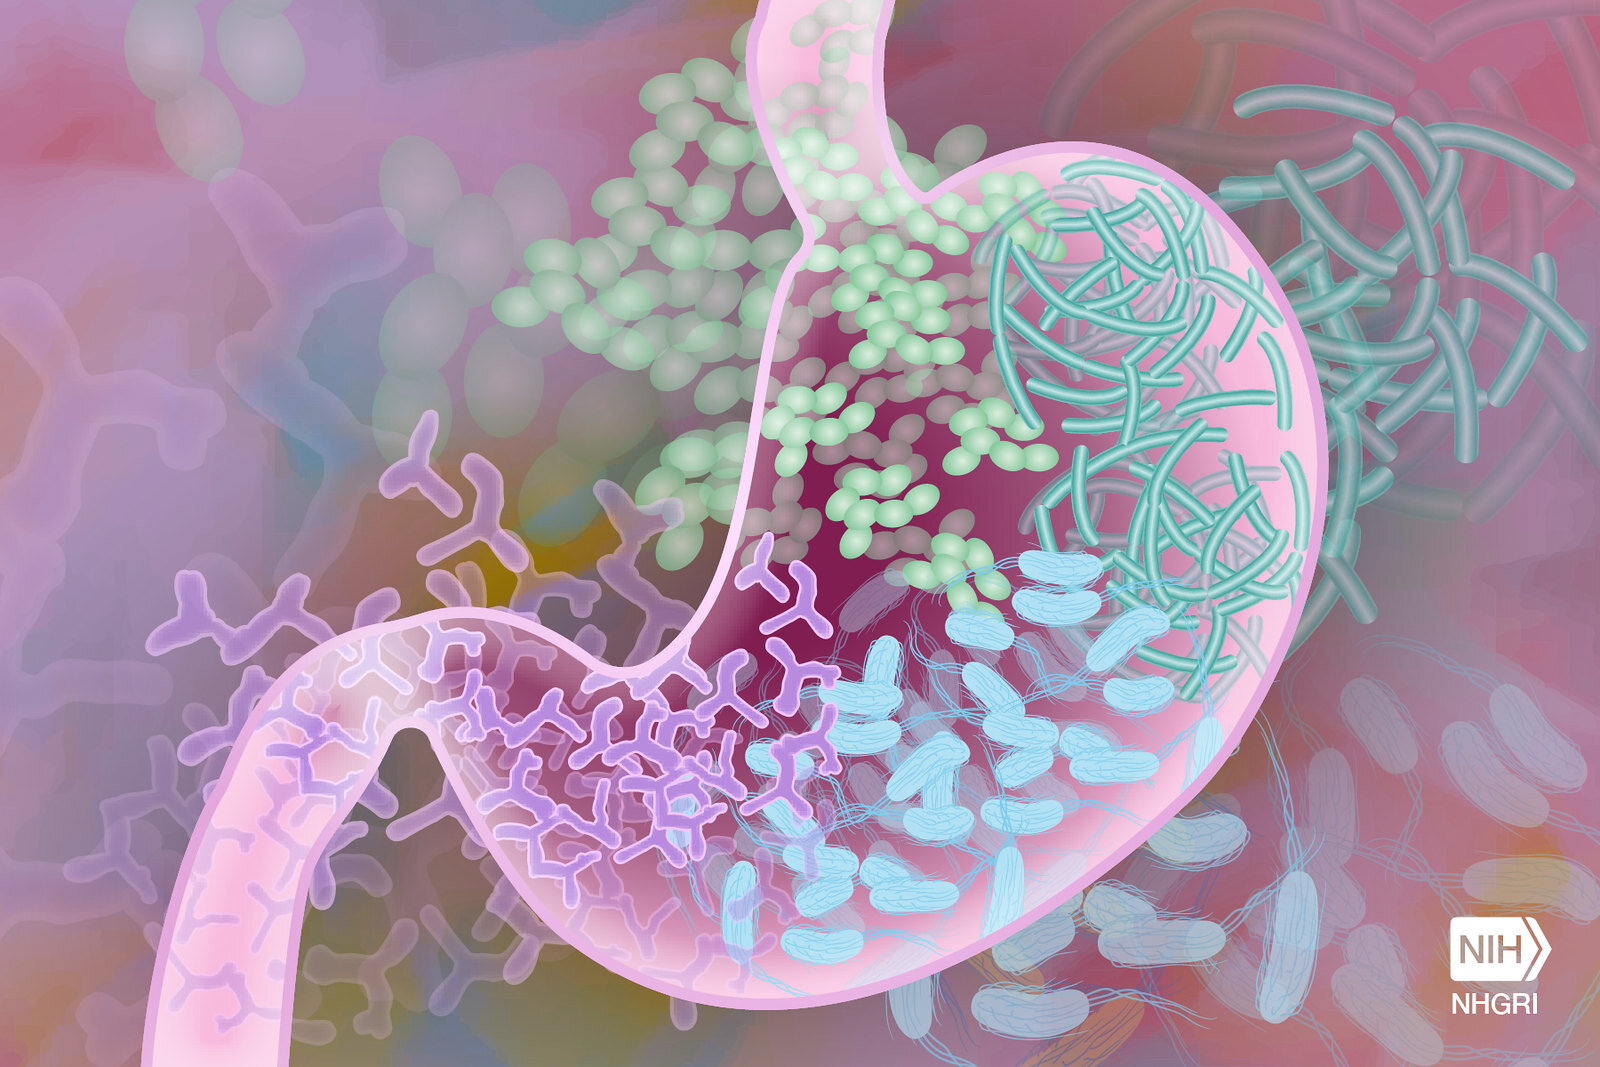 Certain gut conditions may be early warning signs of Parkinson’s disease